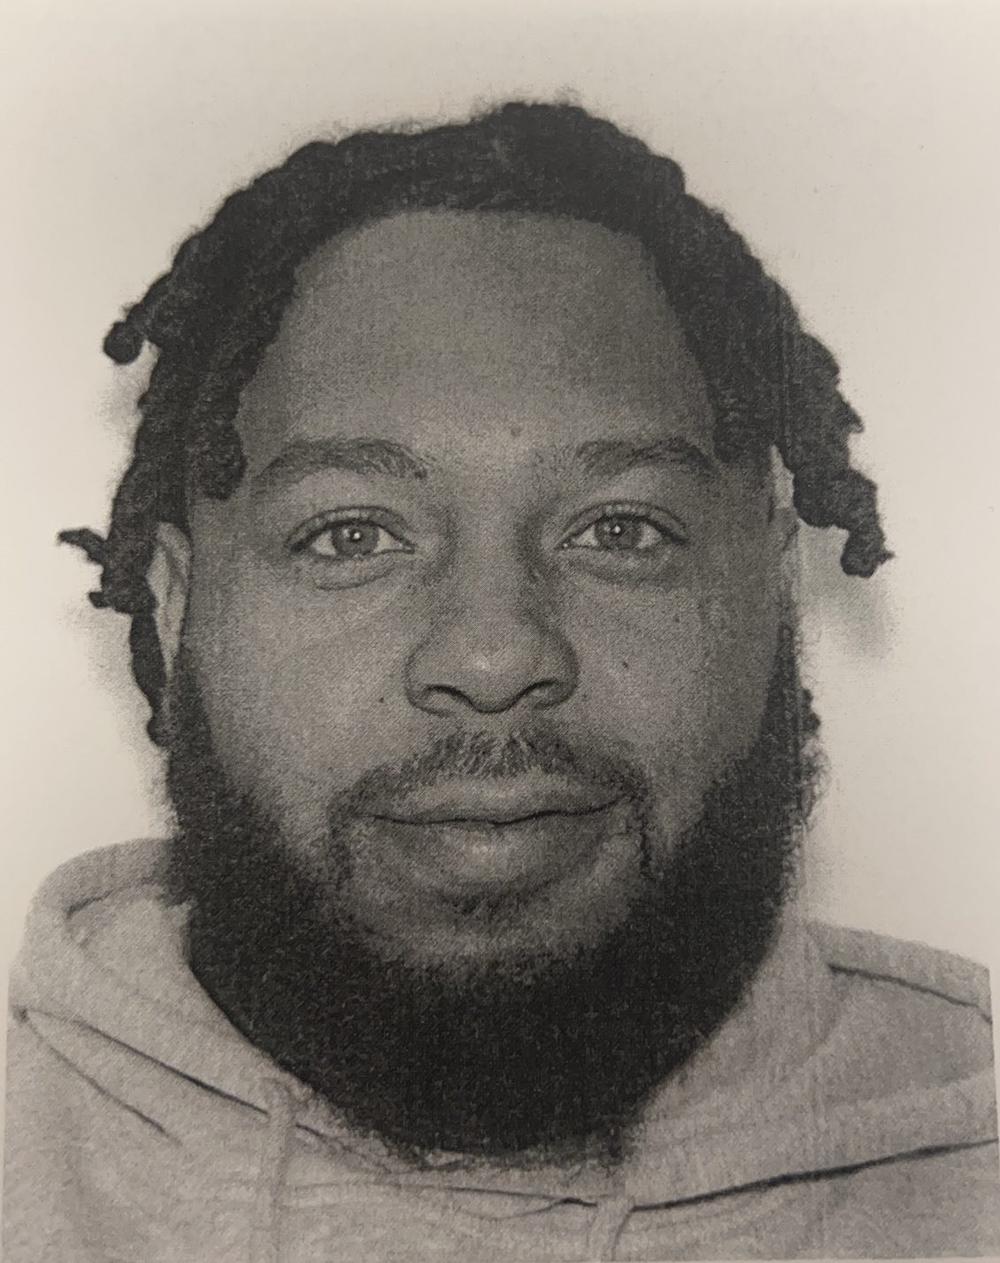 Jamichael Jones, 33, has been charged with felony murder, aggravated assault, home invasion and battery in connection with the killing of the Atlanta rapper Trouble.